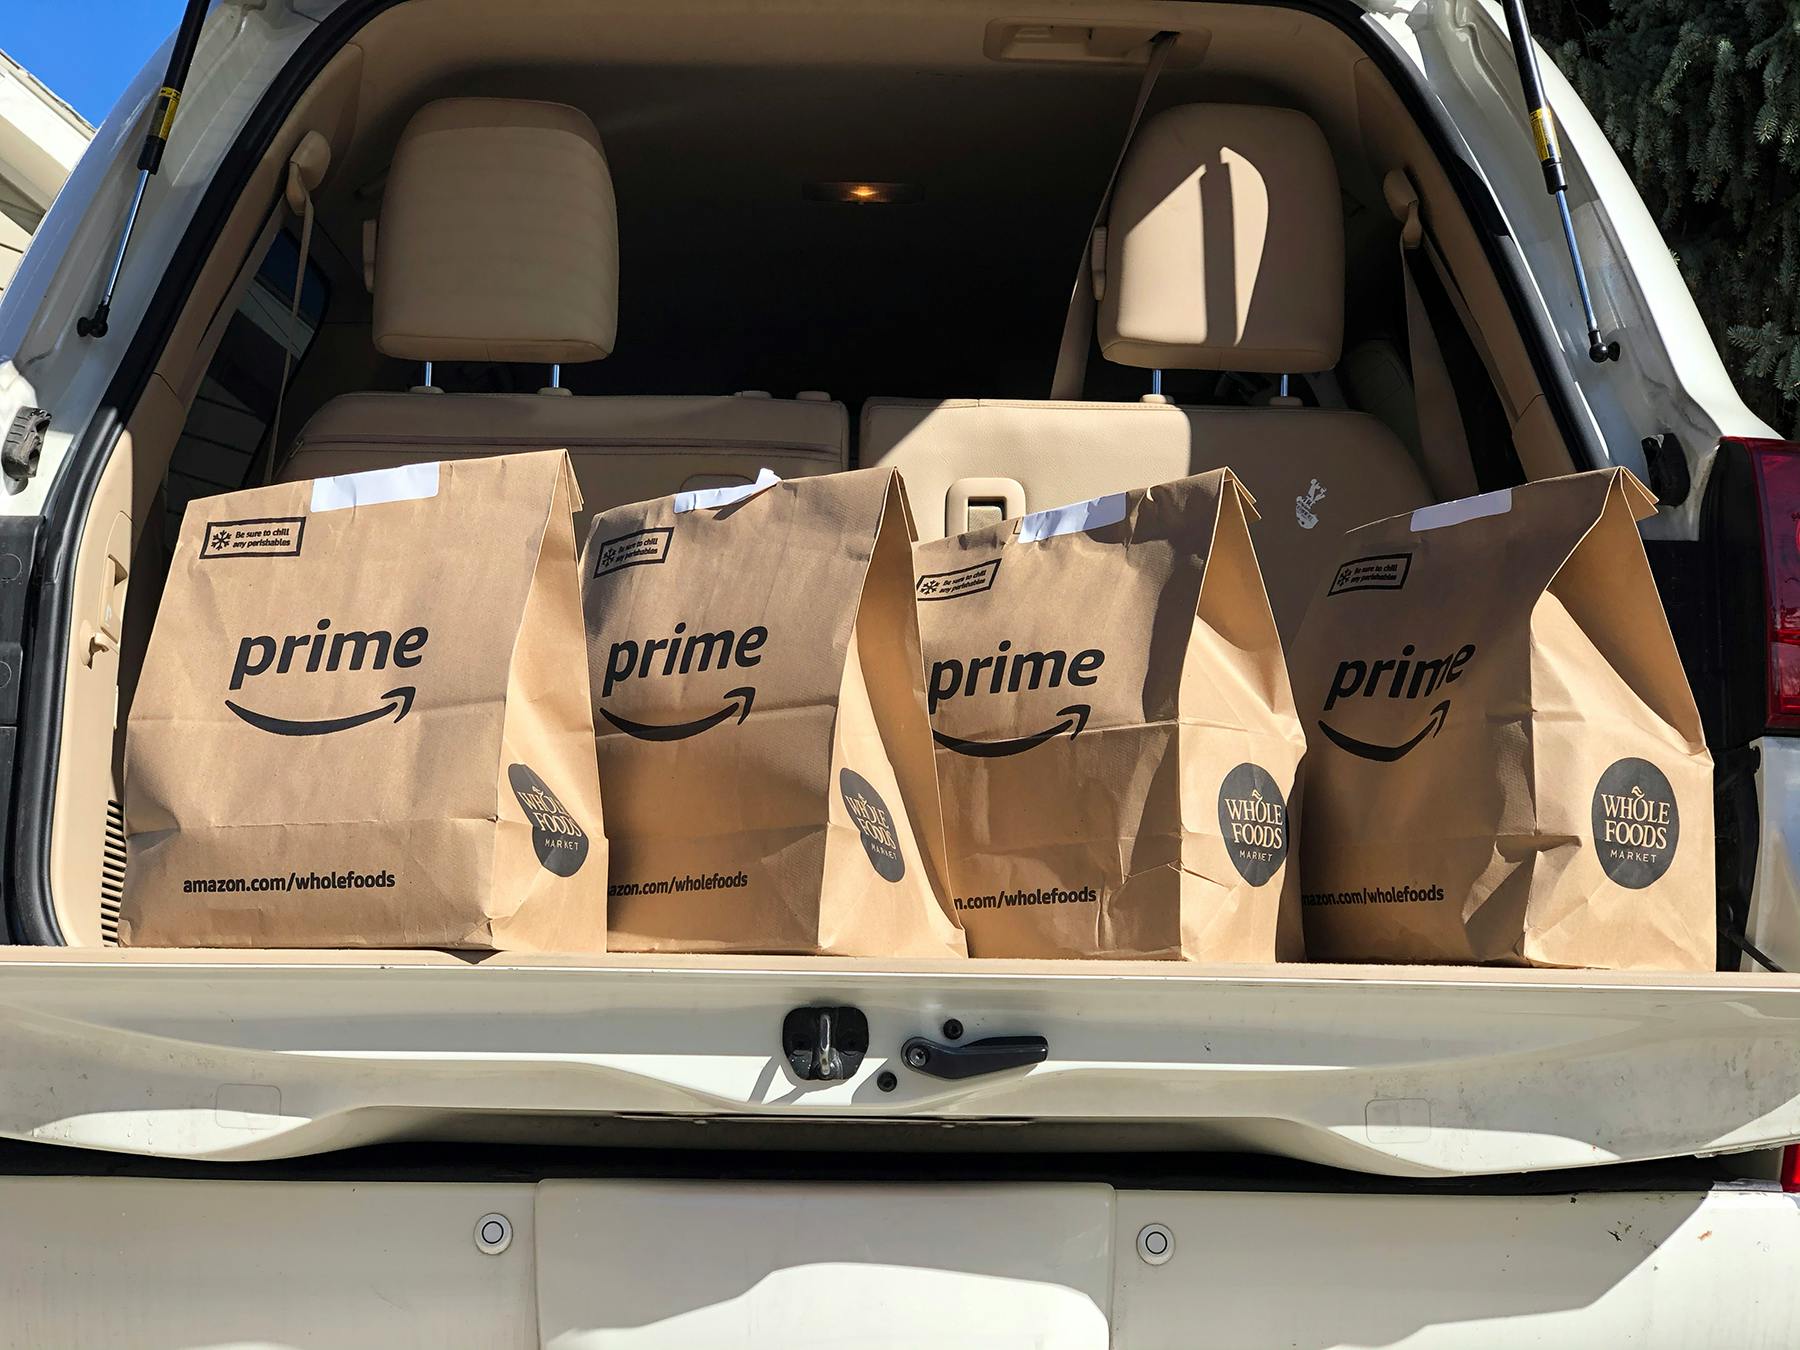 Amazon Prime Now grocery bags in the trunk of a vehicle.